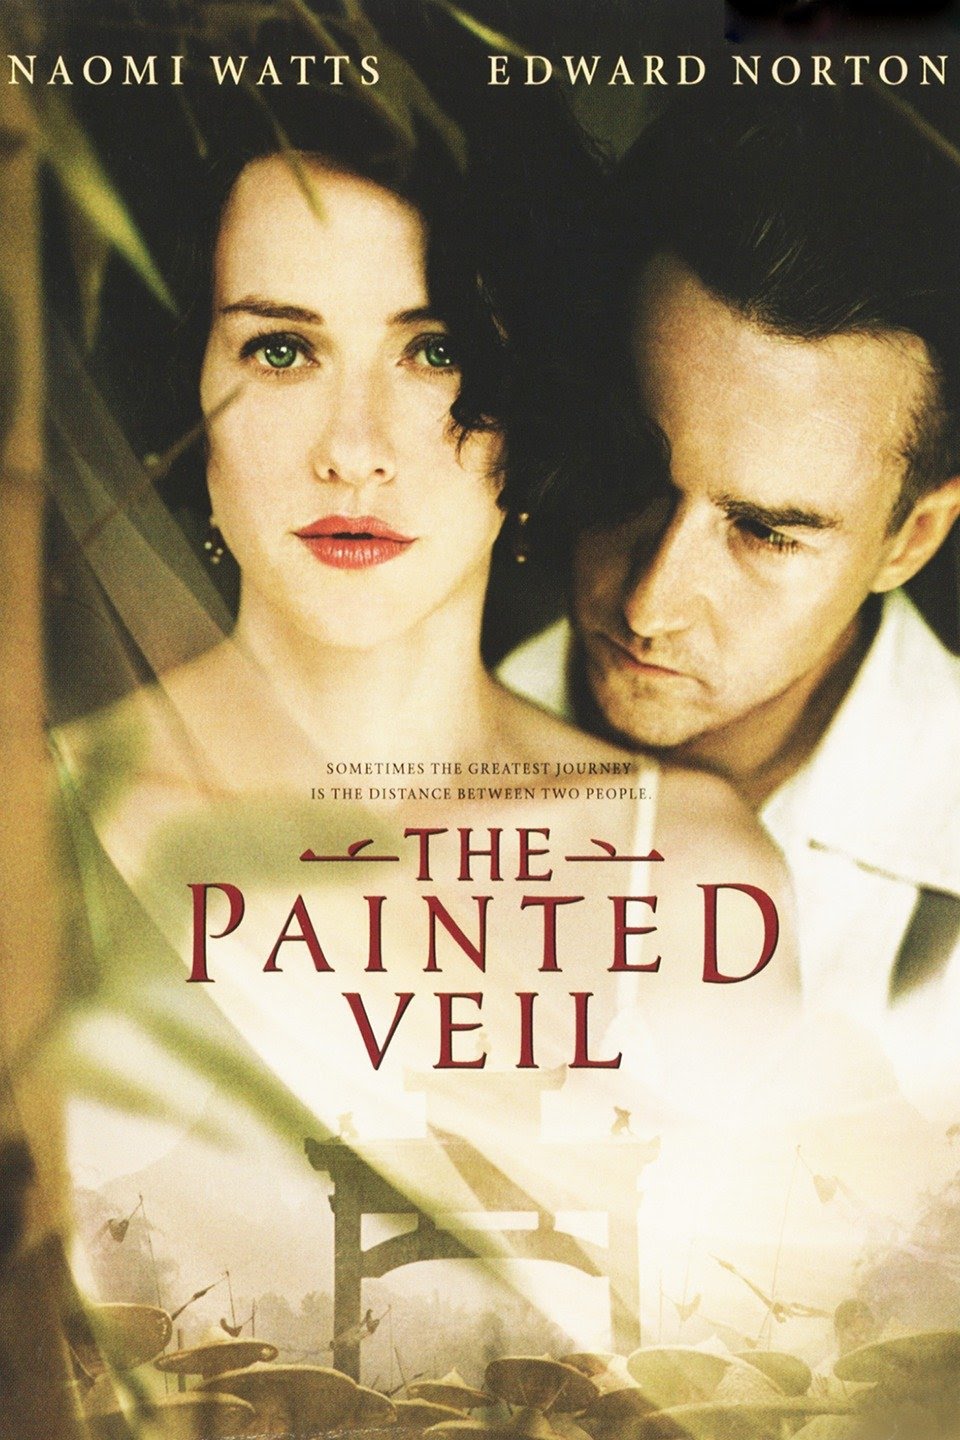 The Painted Viel